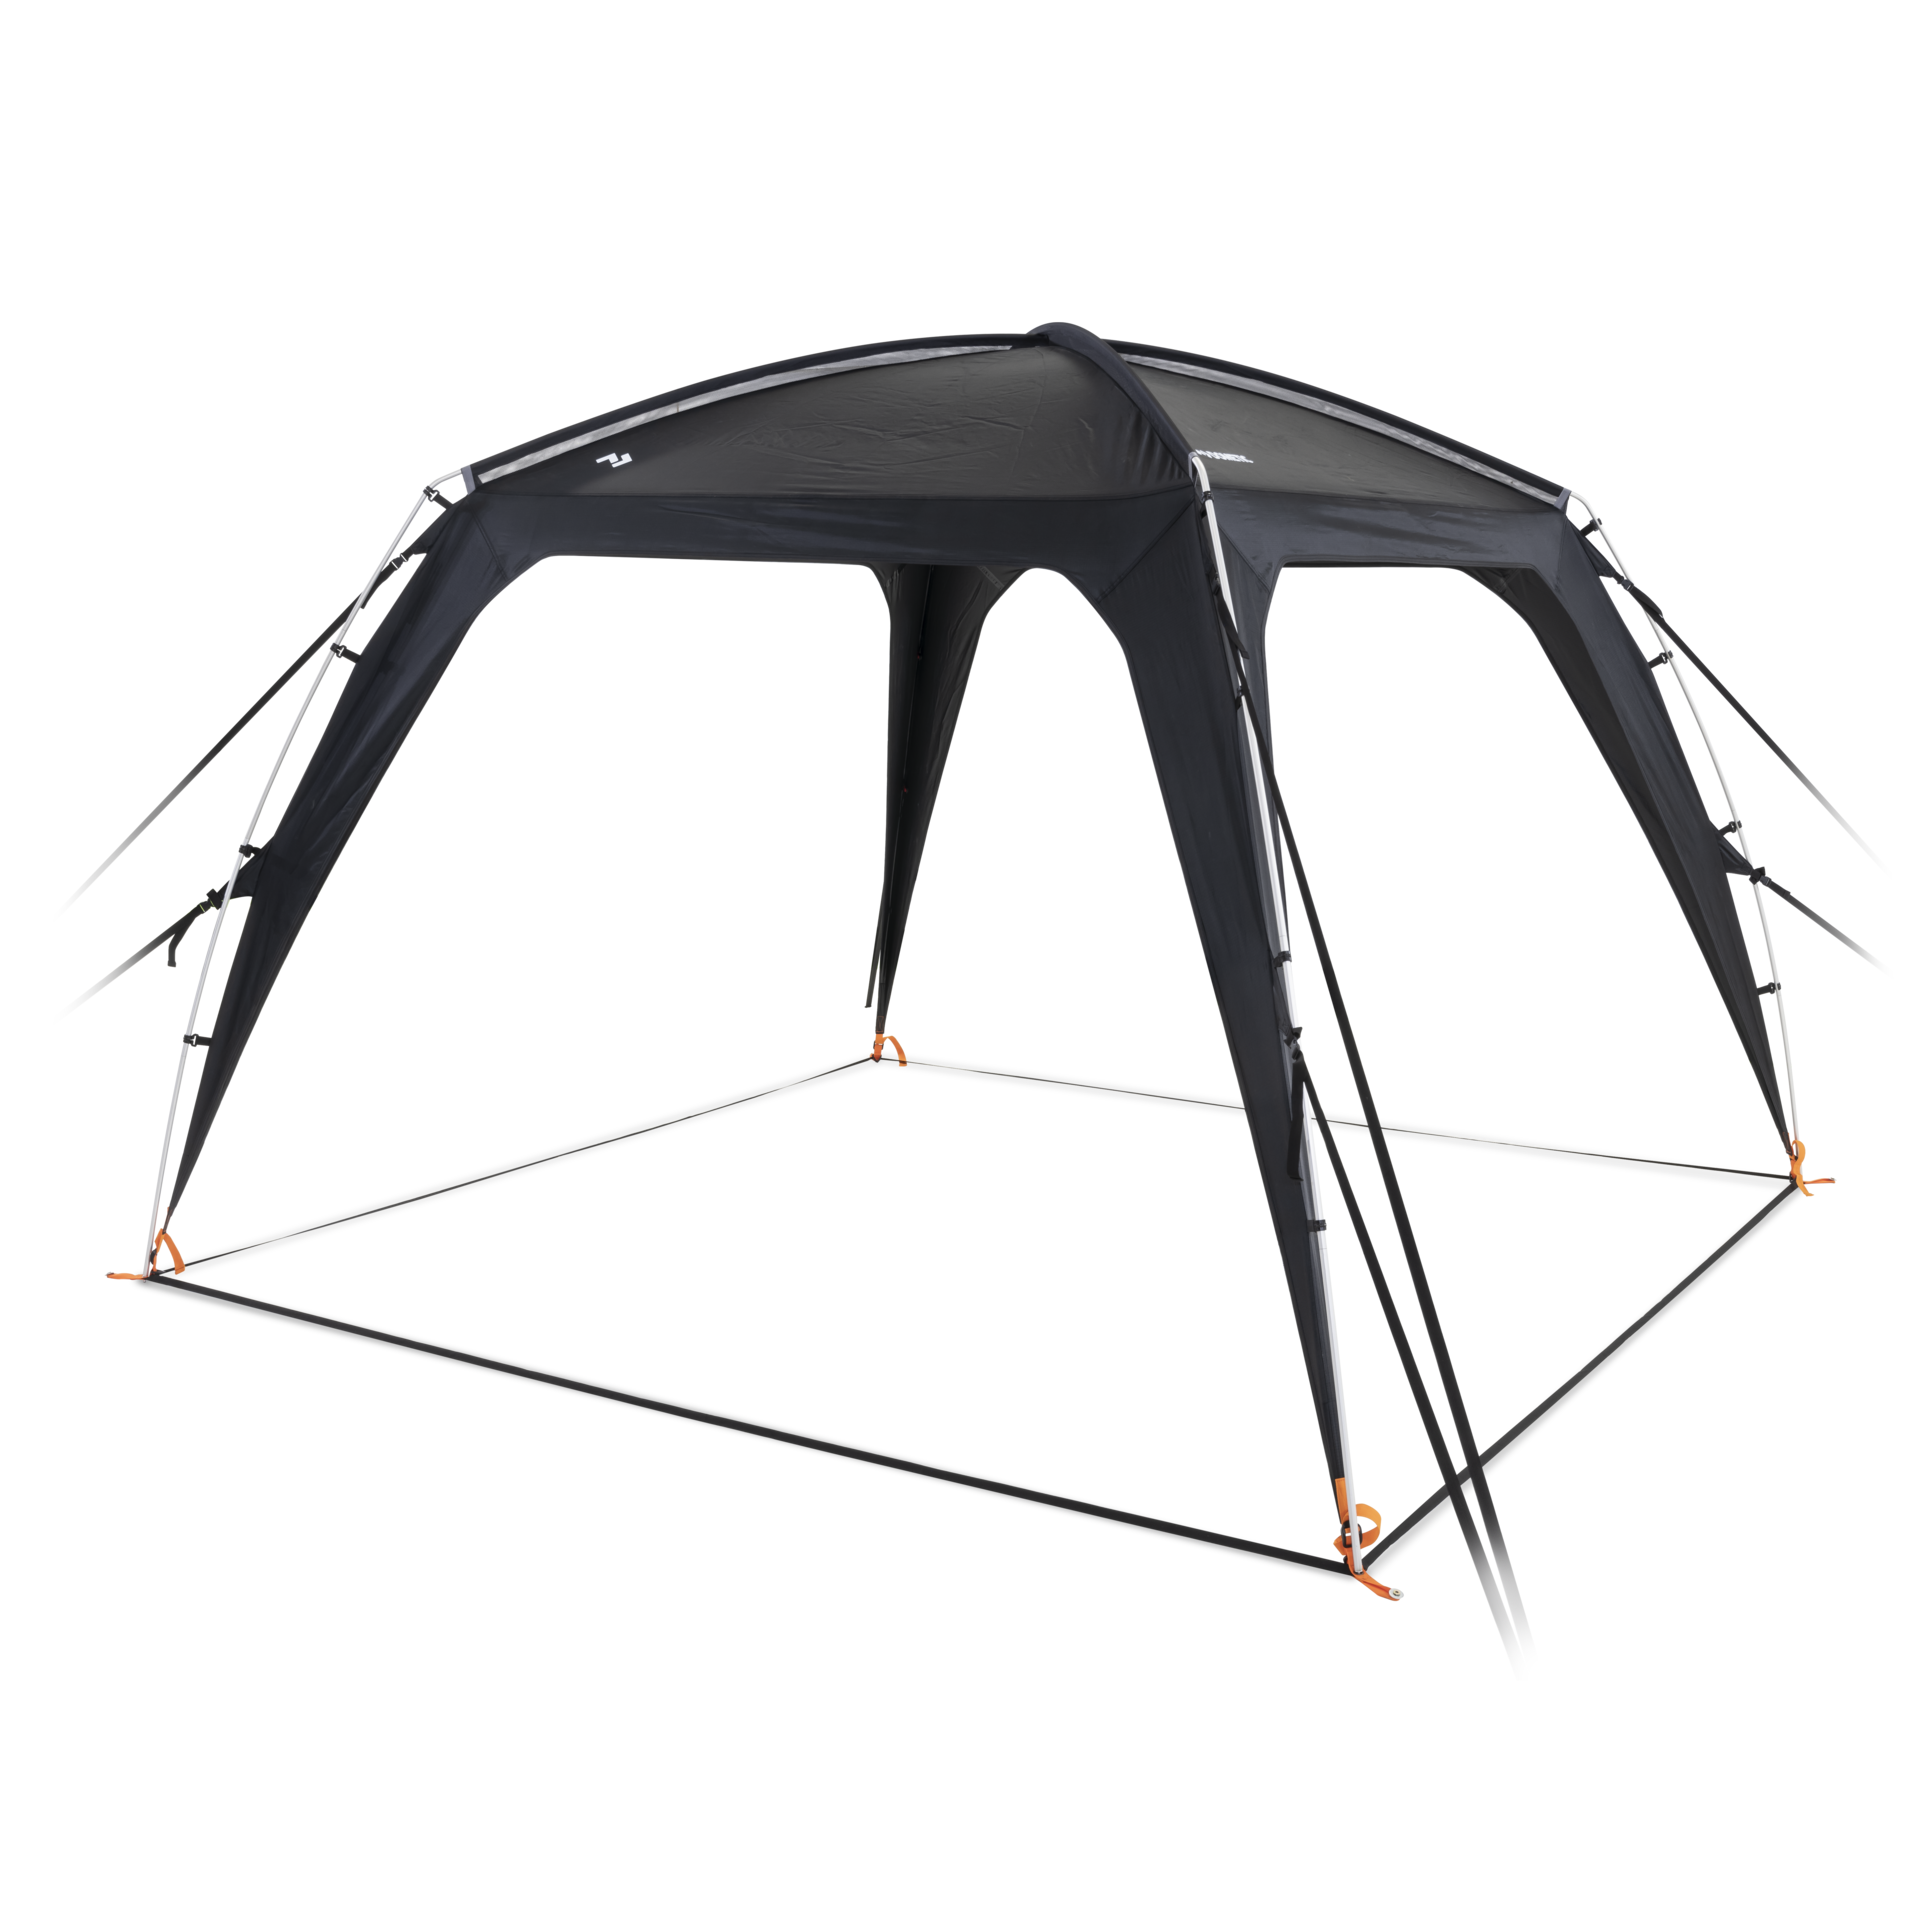 Premium Camping Tents Collection, Dometic Outdoor